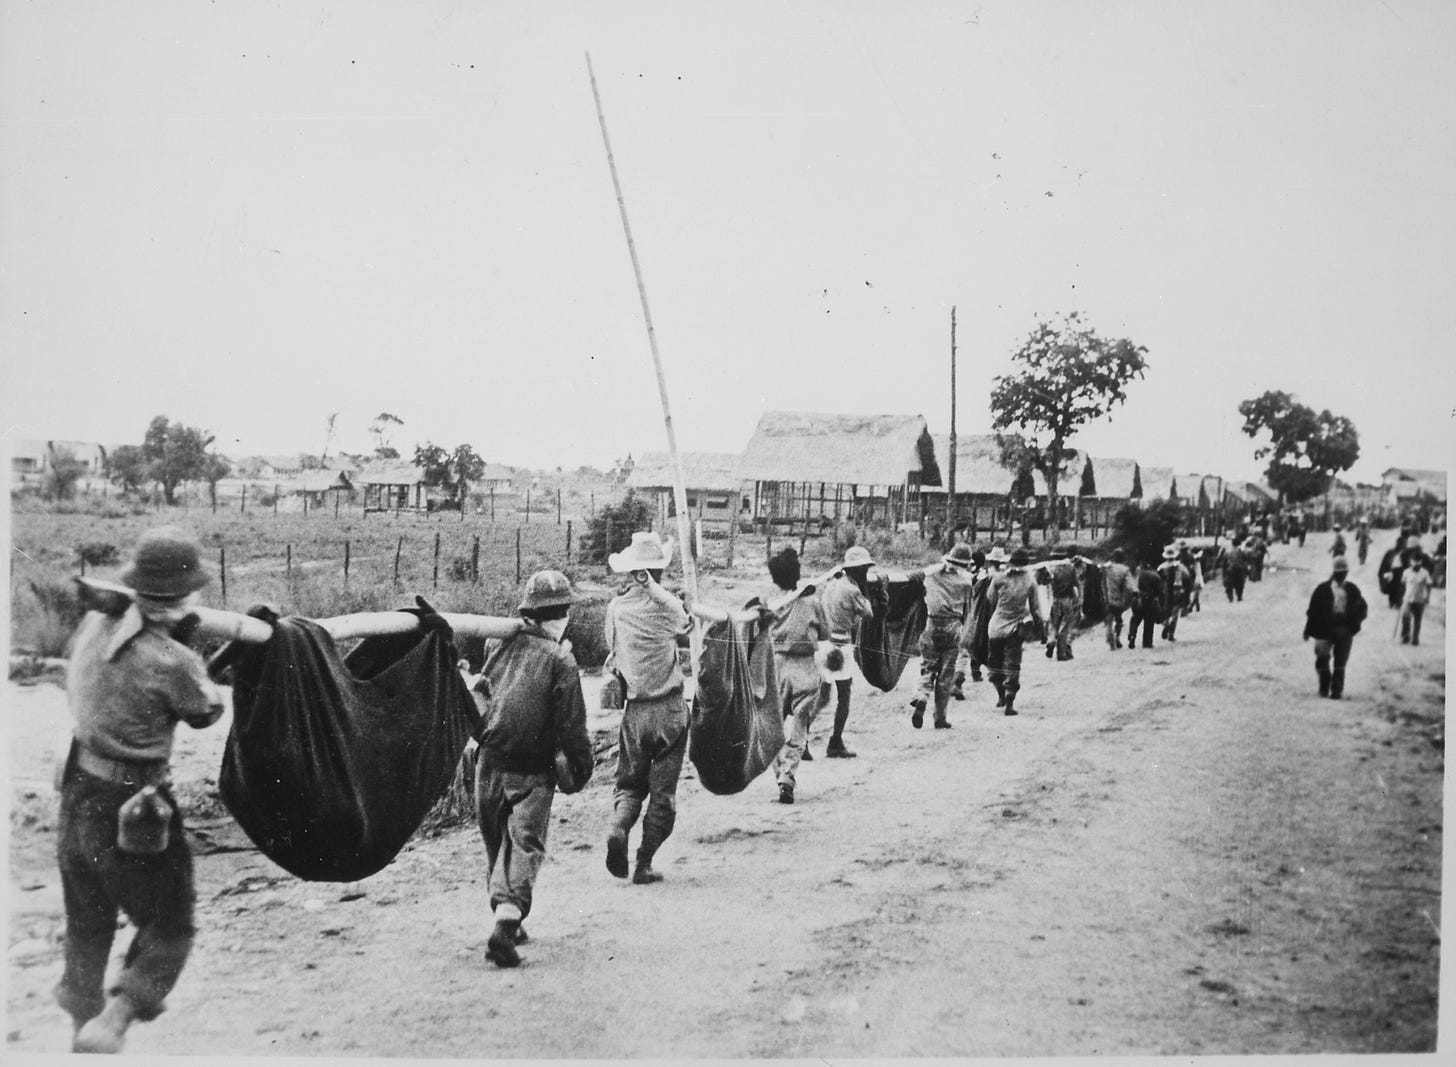 Photograph of American Prisoners Using Improvised Litters to Carry Comrades, 05-1942 - NARA - 535564.jpg